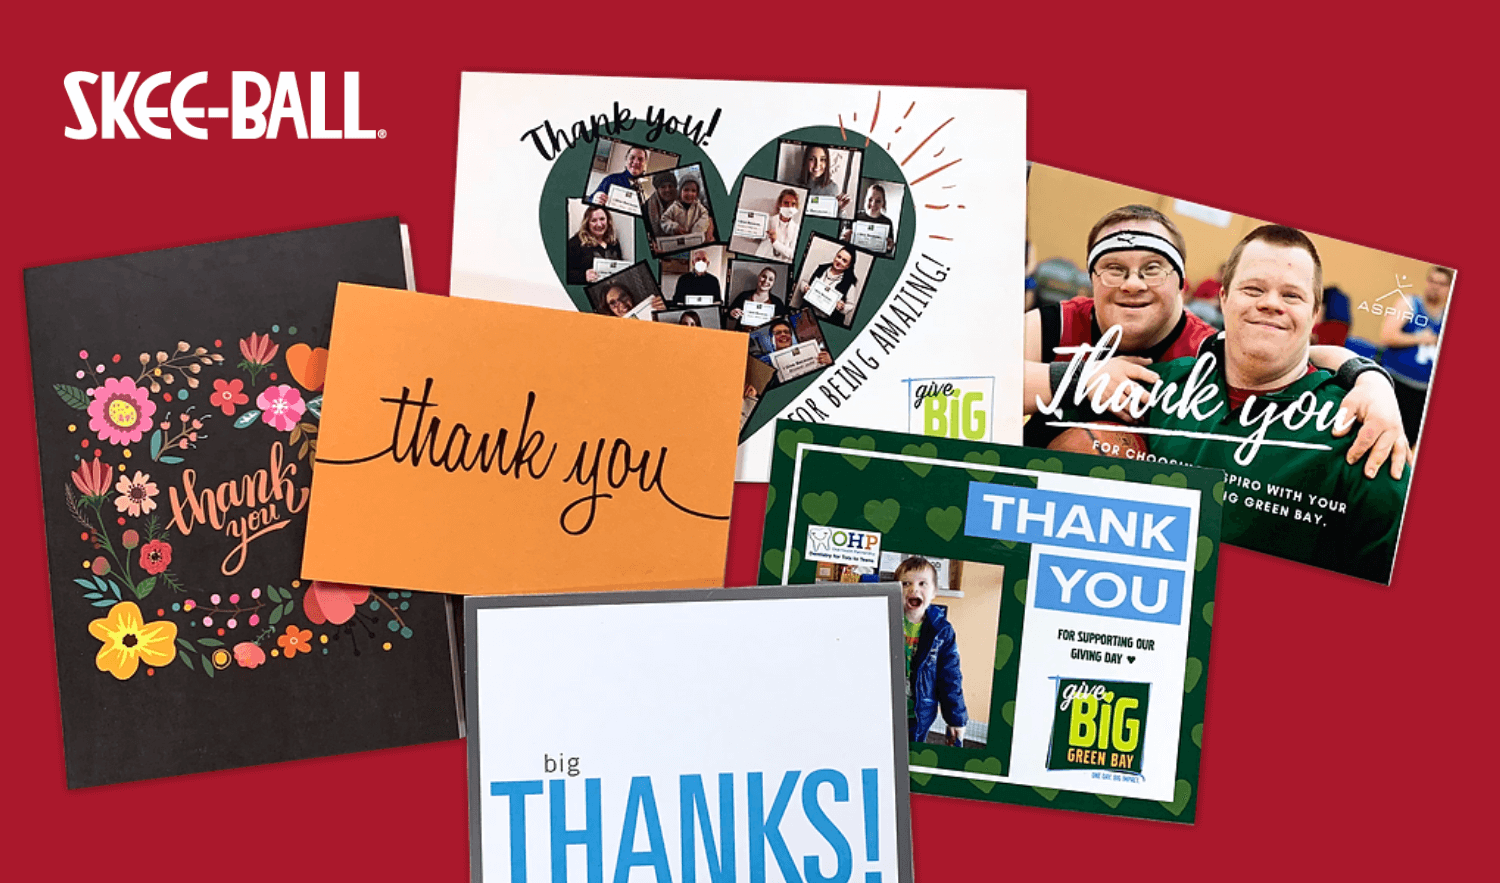 A series of thank you cards showing off the charities Skee-Ball gives back